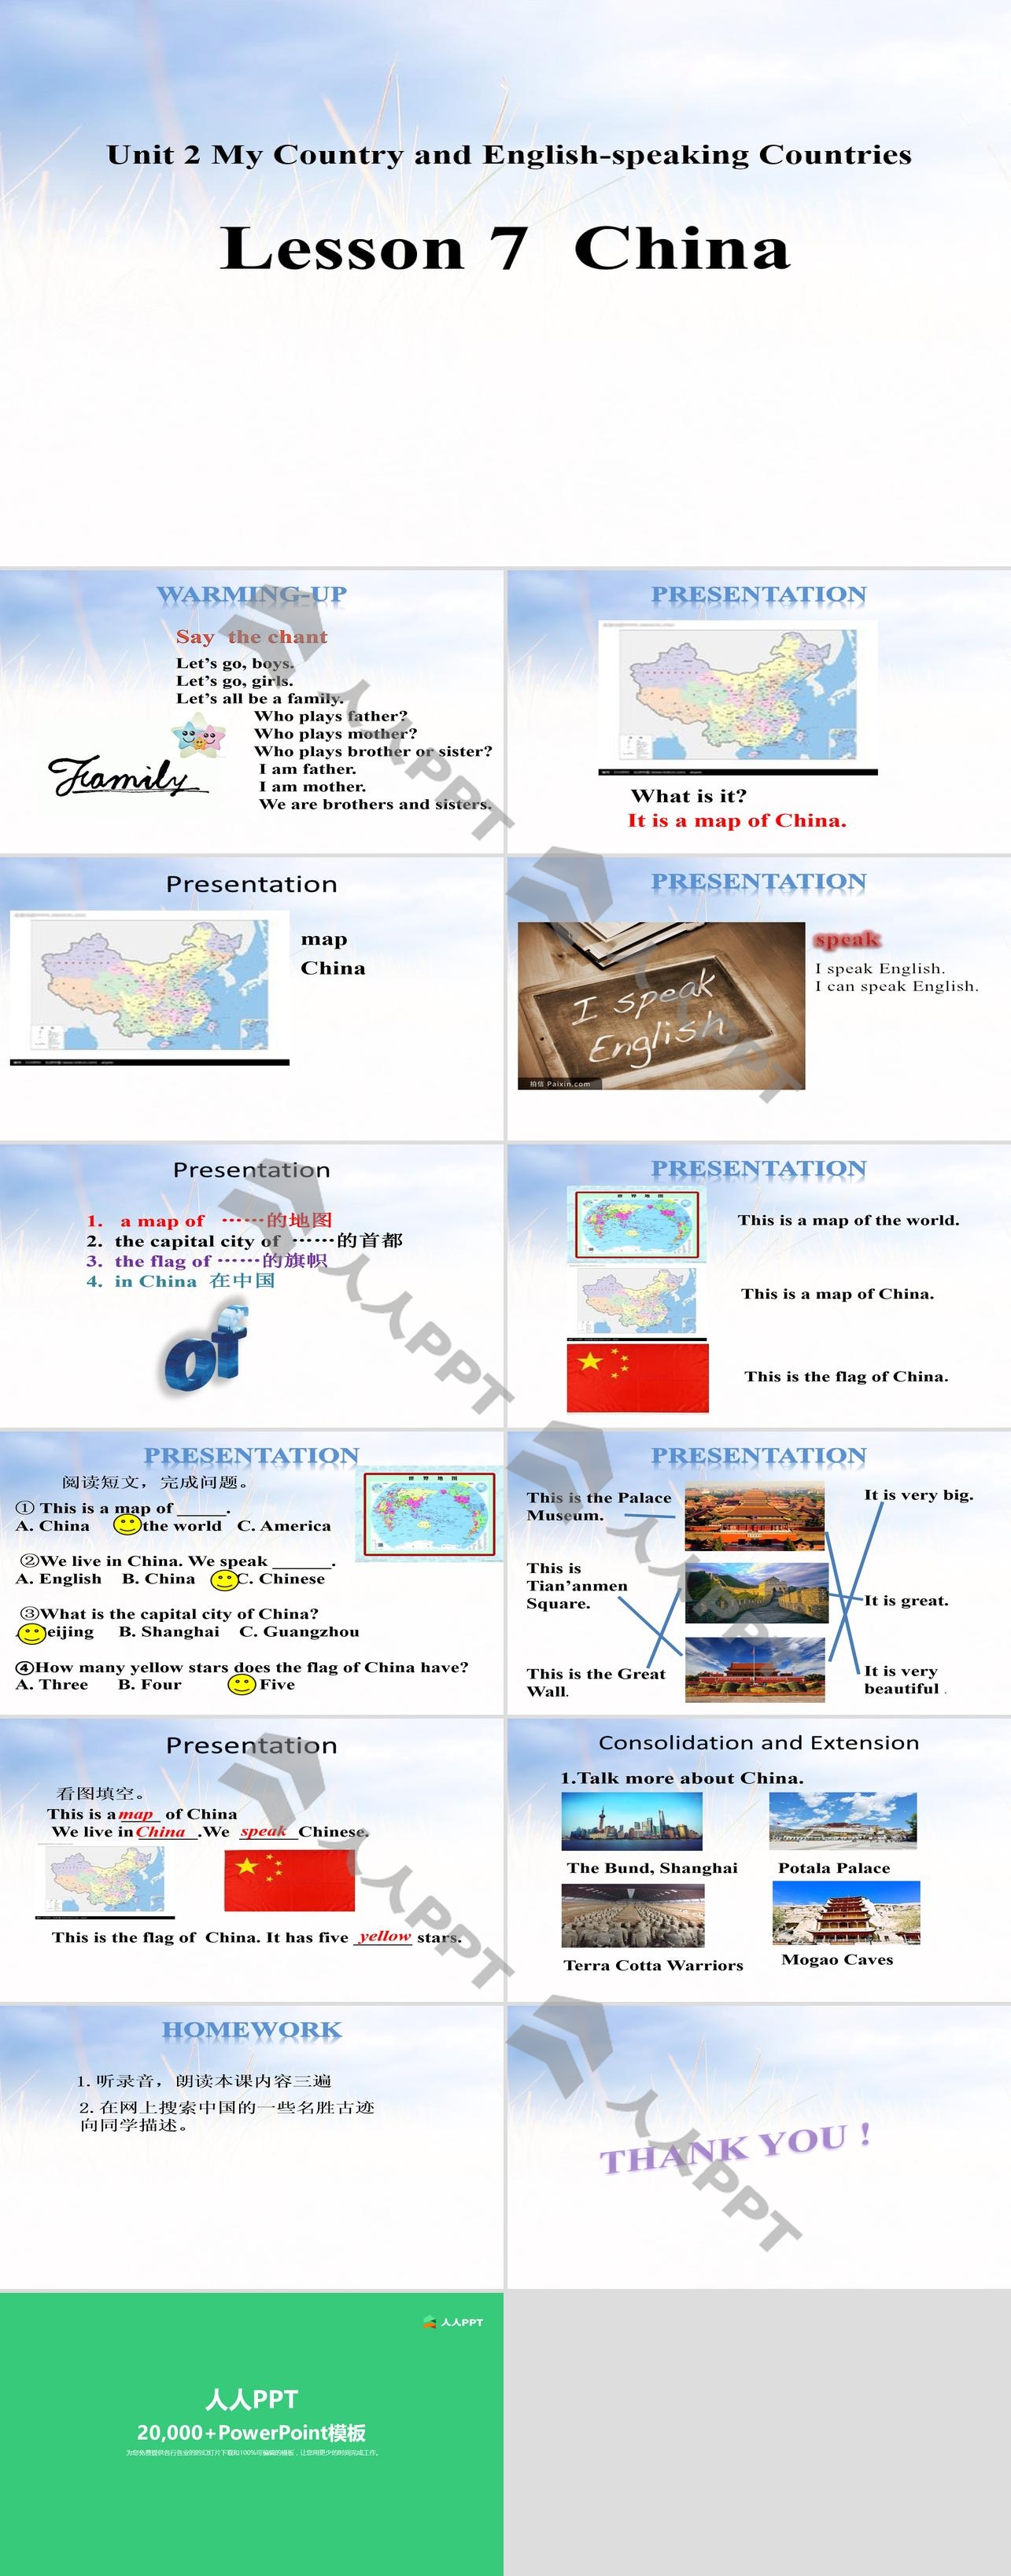 《China》My Country and English-speaking Countries PPT课件长图